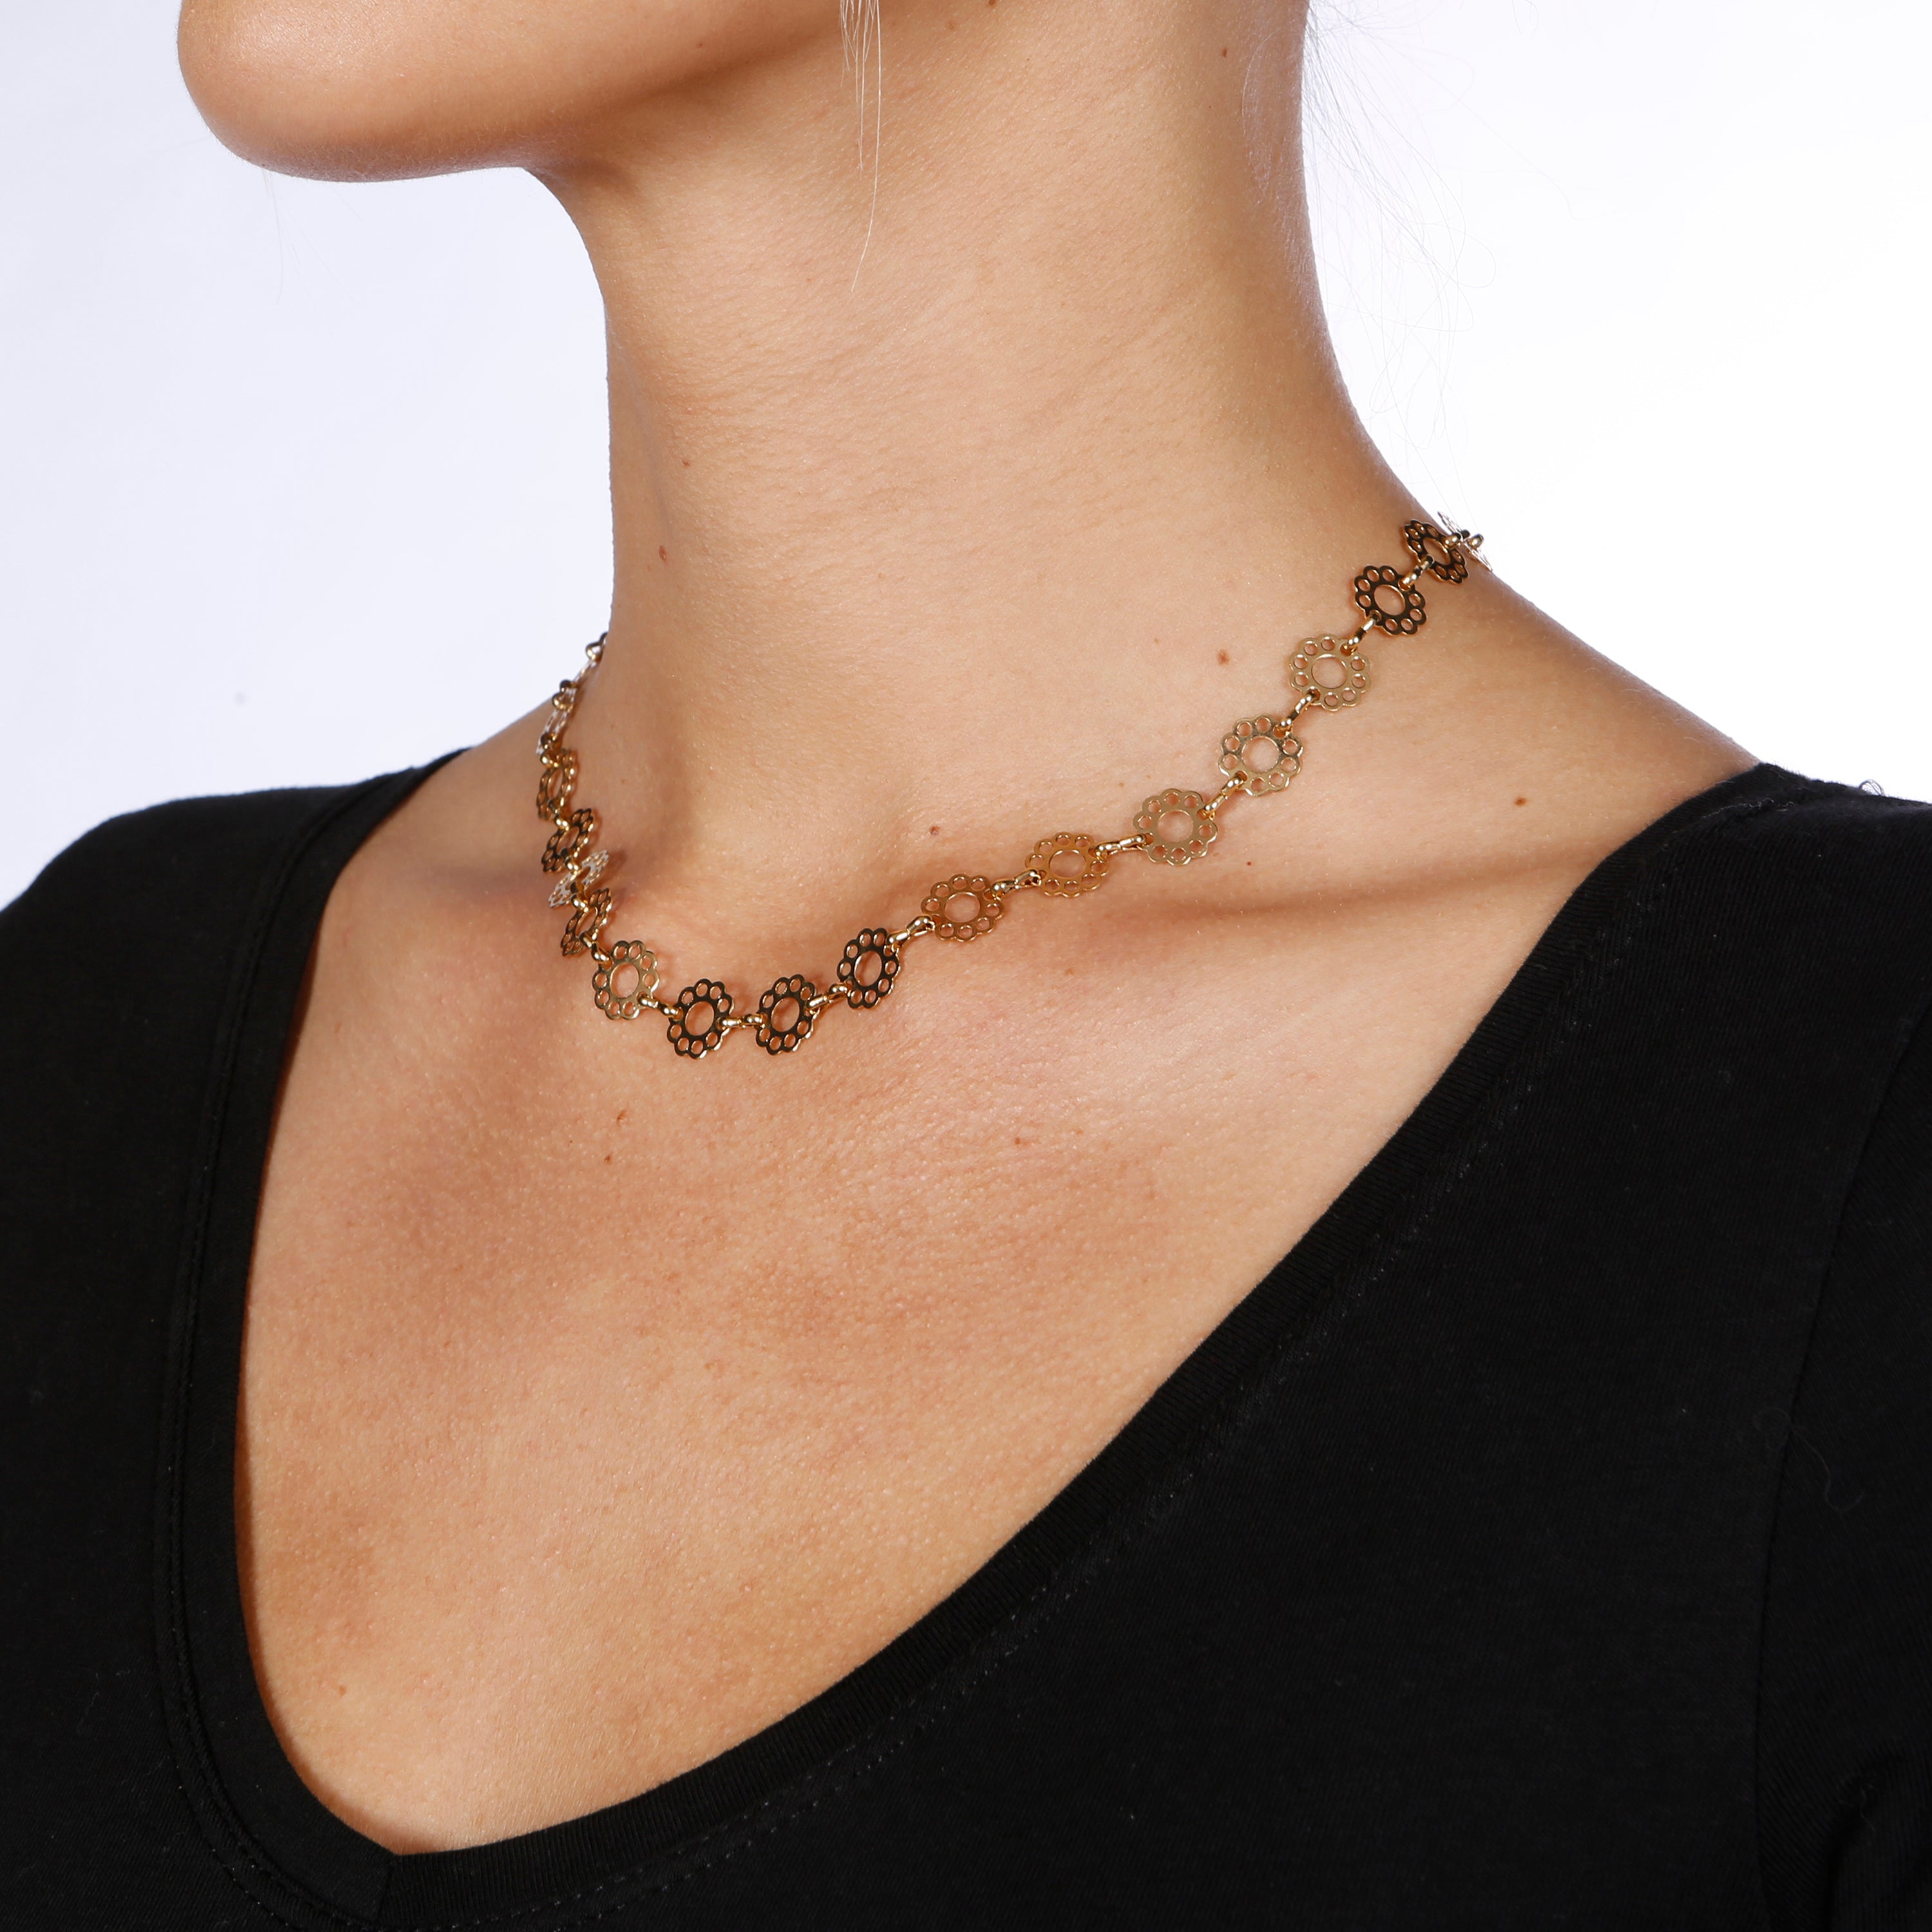 Marguerite Chain Necklace - Mirabelle Jewellery